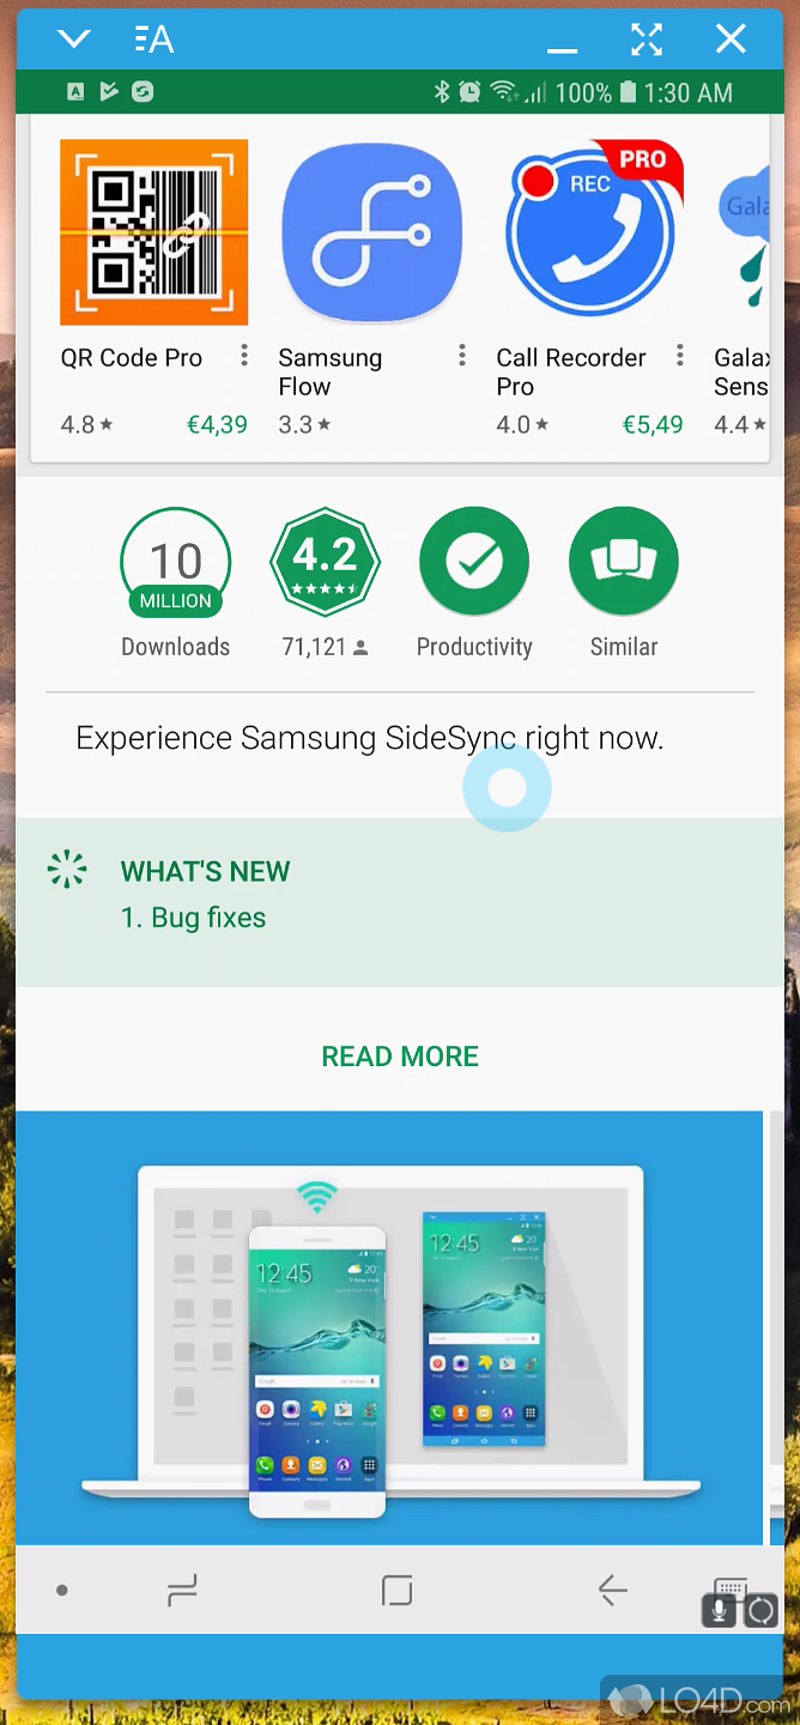 Allows you to transfer files to your computer - Screenshot of Samsung SideSync